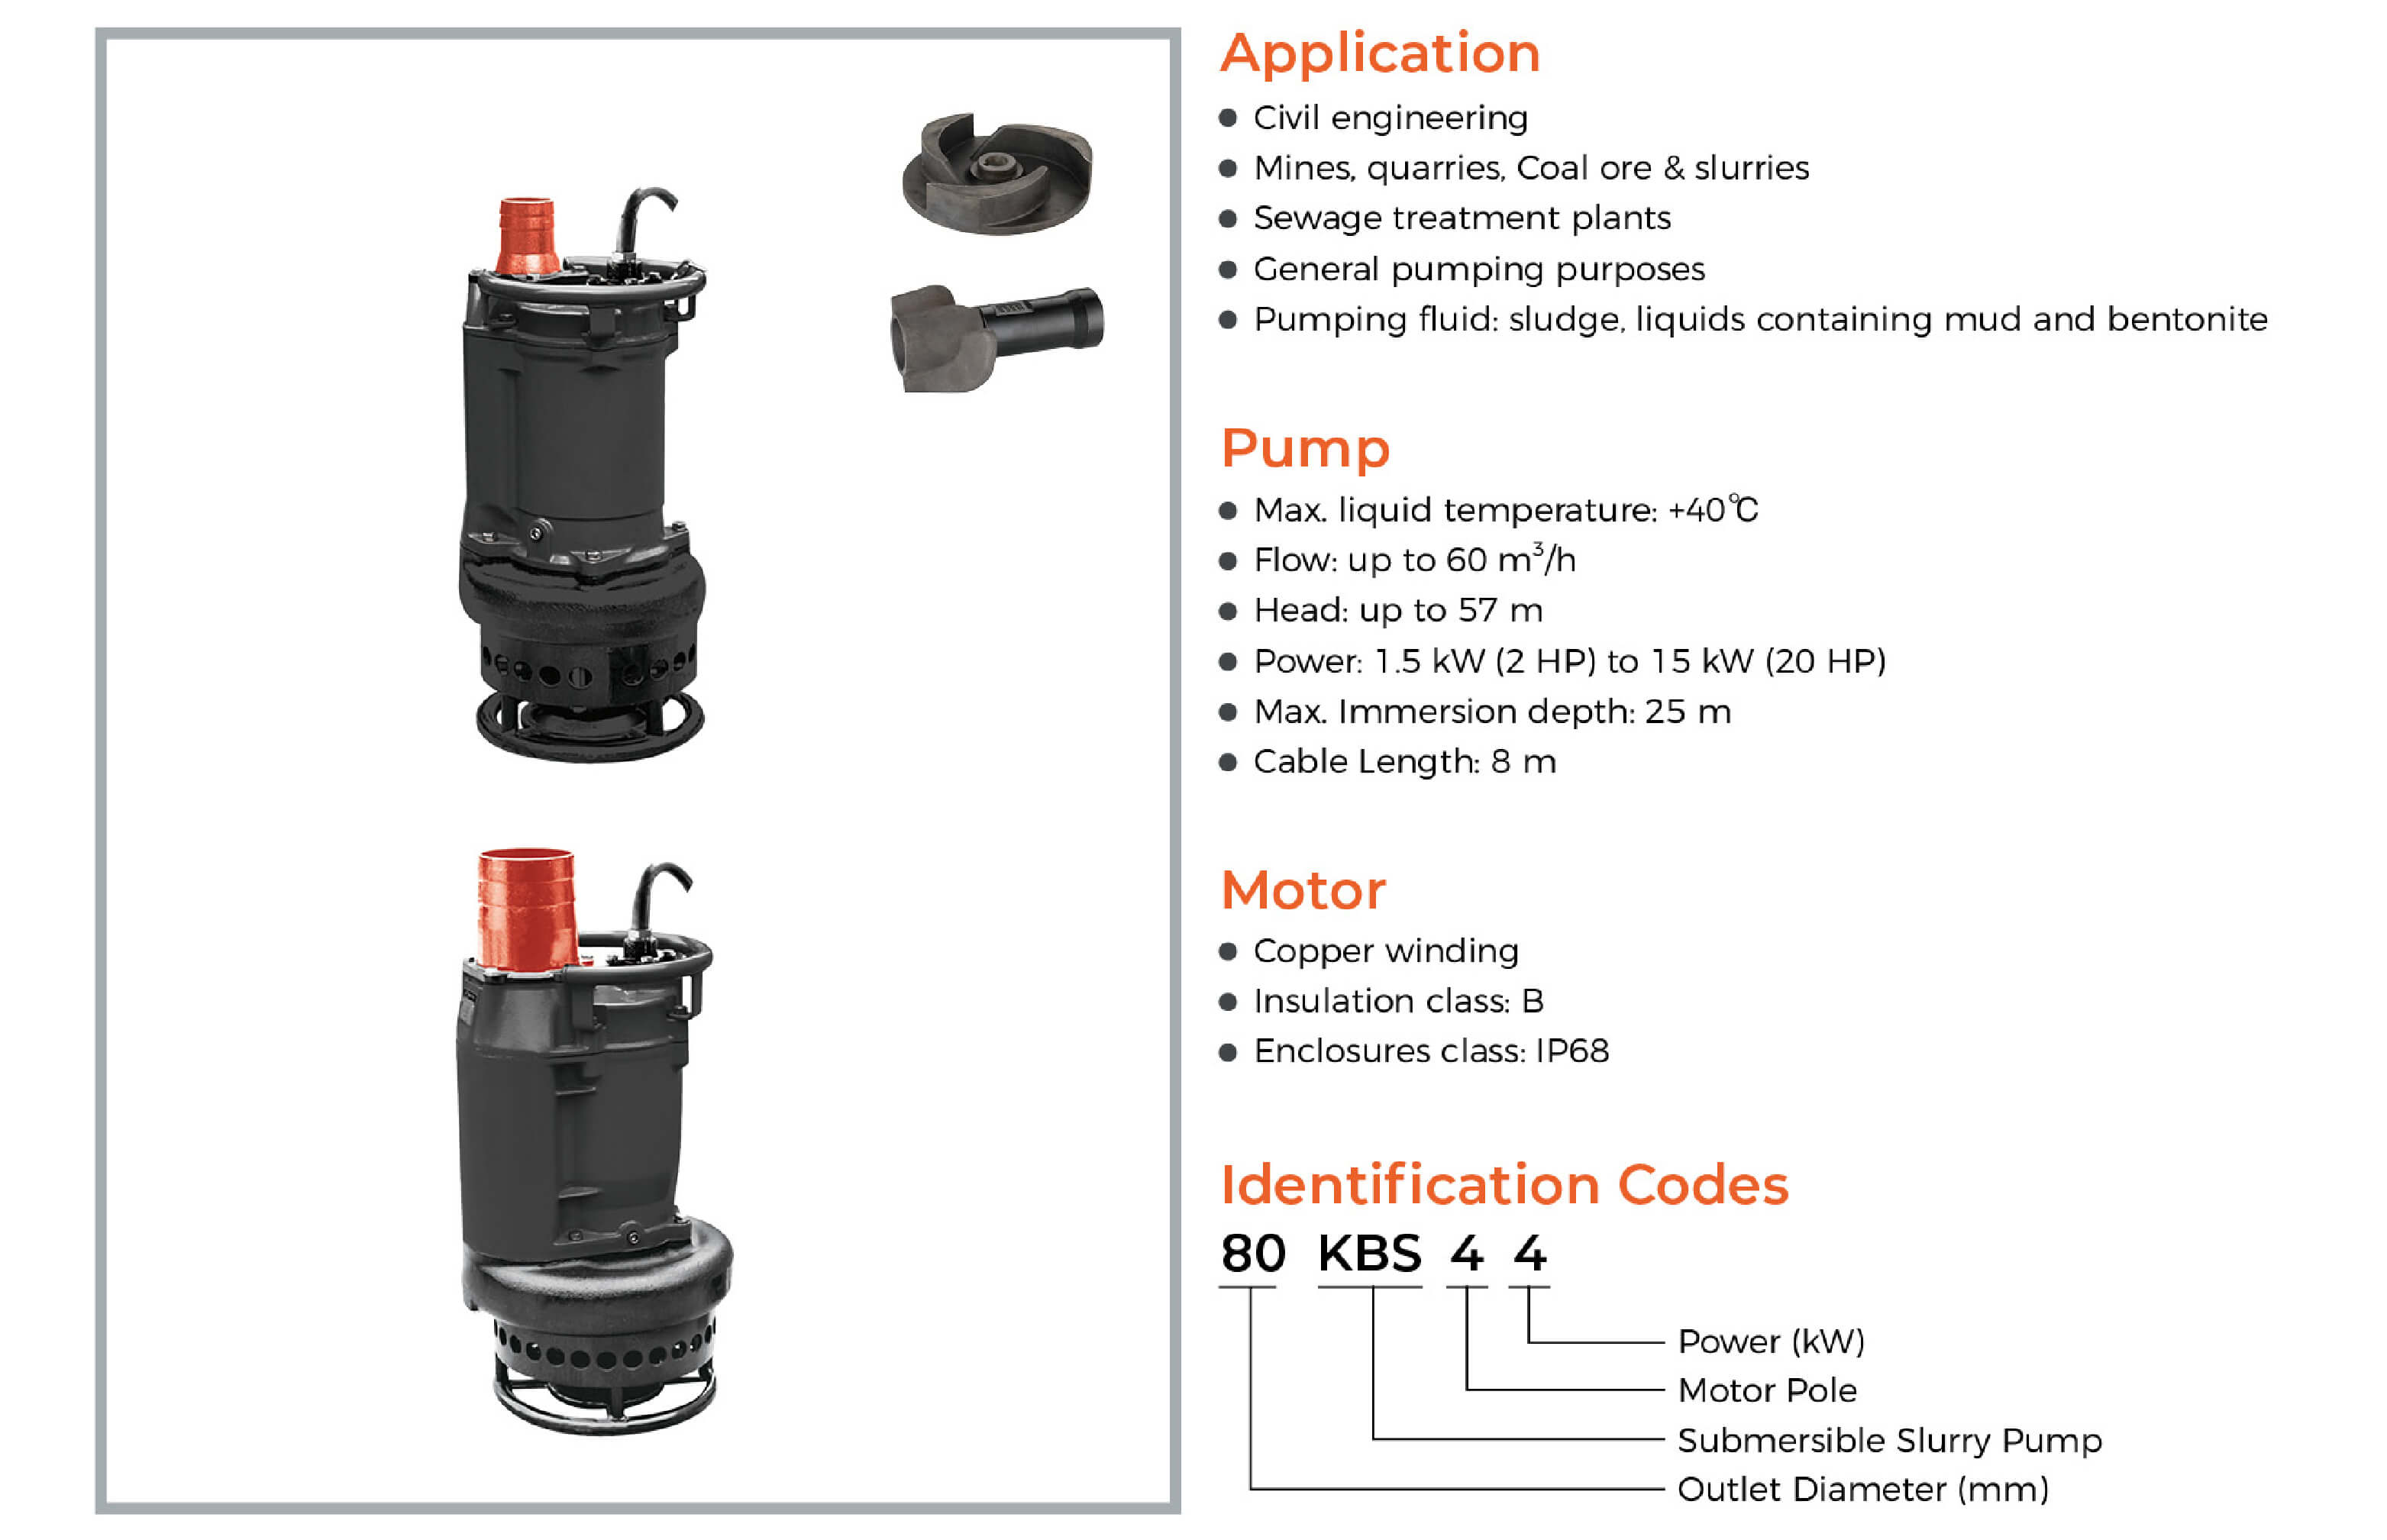 KBS Submersible Slurry Pump Features